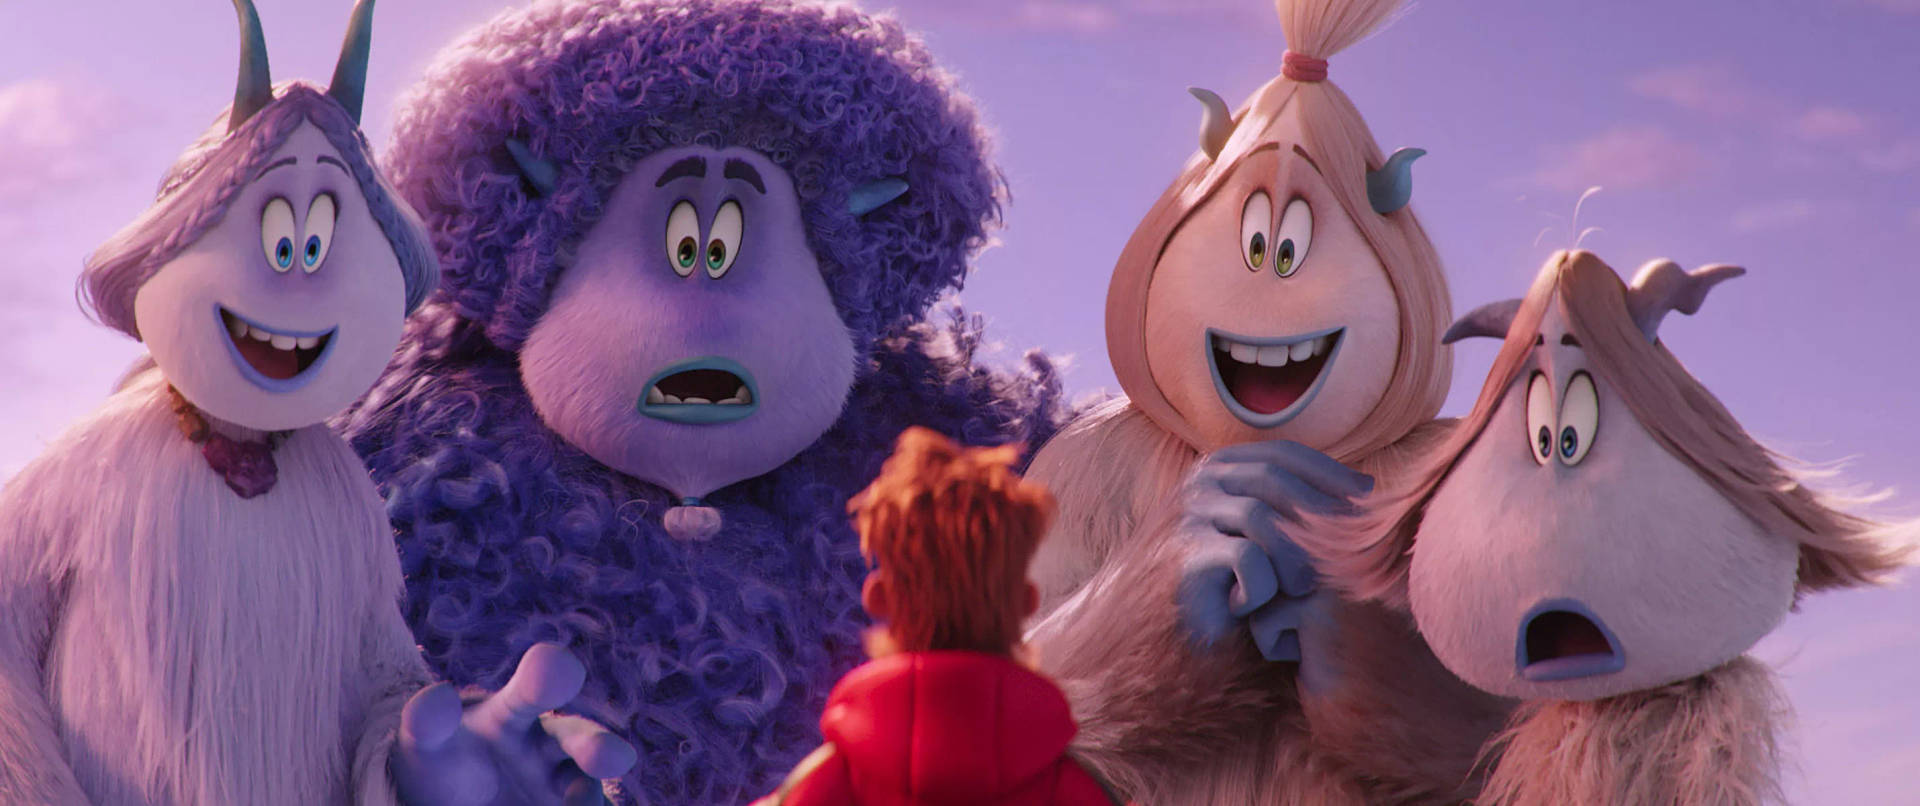 Fascinated Yetis in Smallfoot animation movie Wallpaper